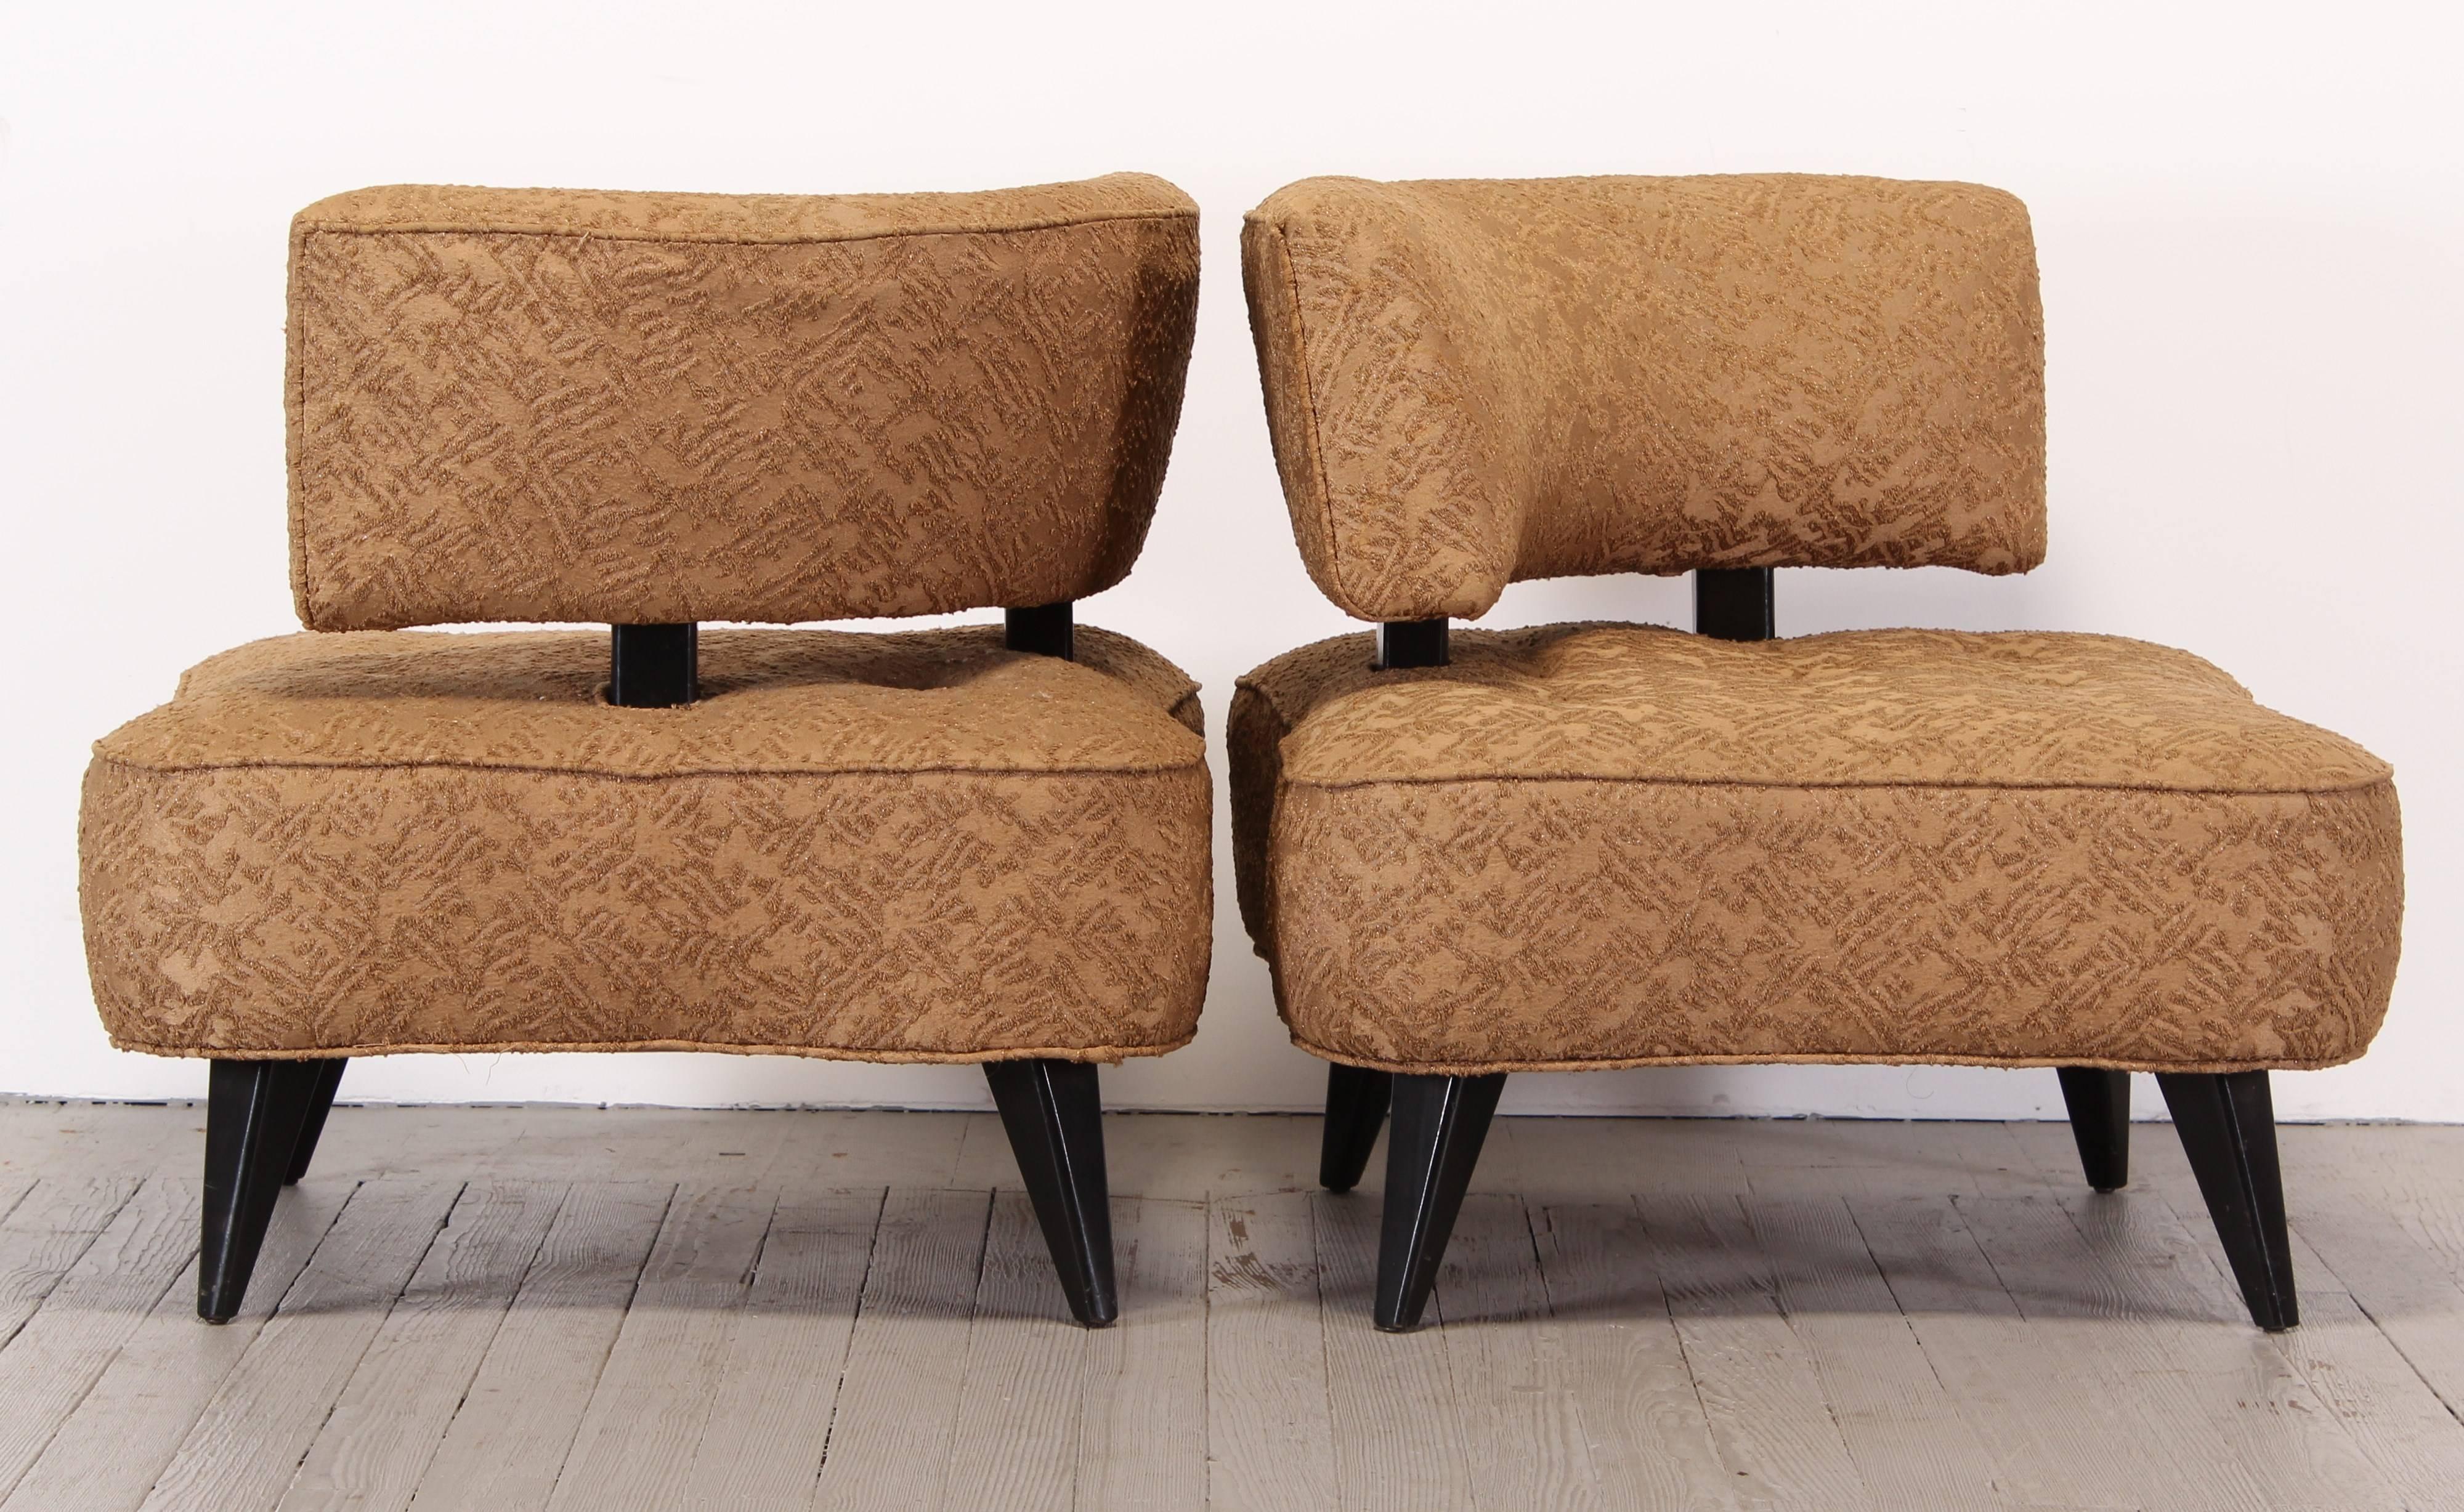 Hollywood Regency Pair of James Mont Style Chairs, 1940